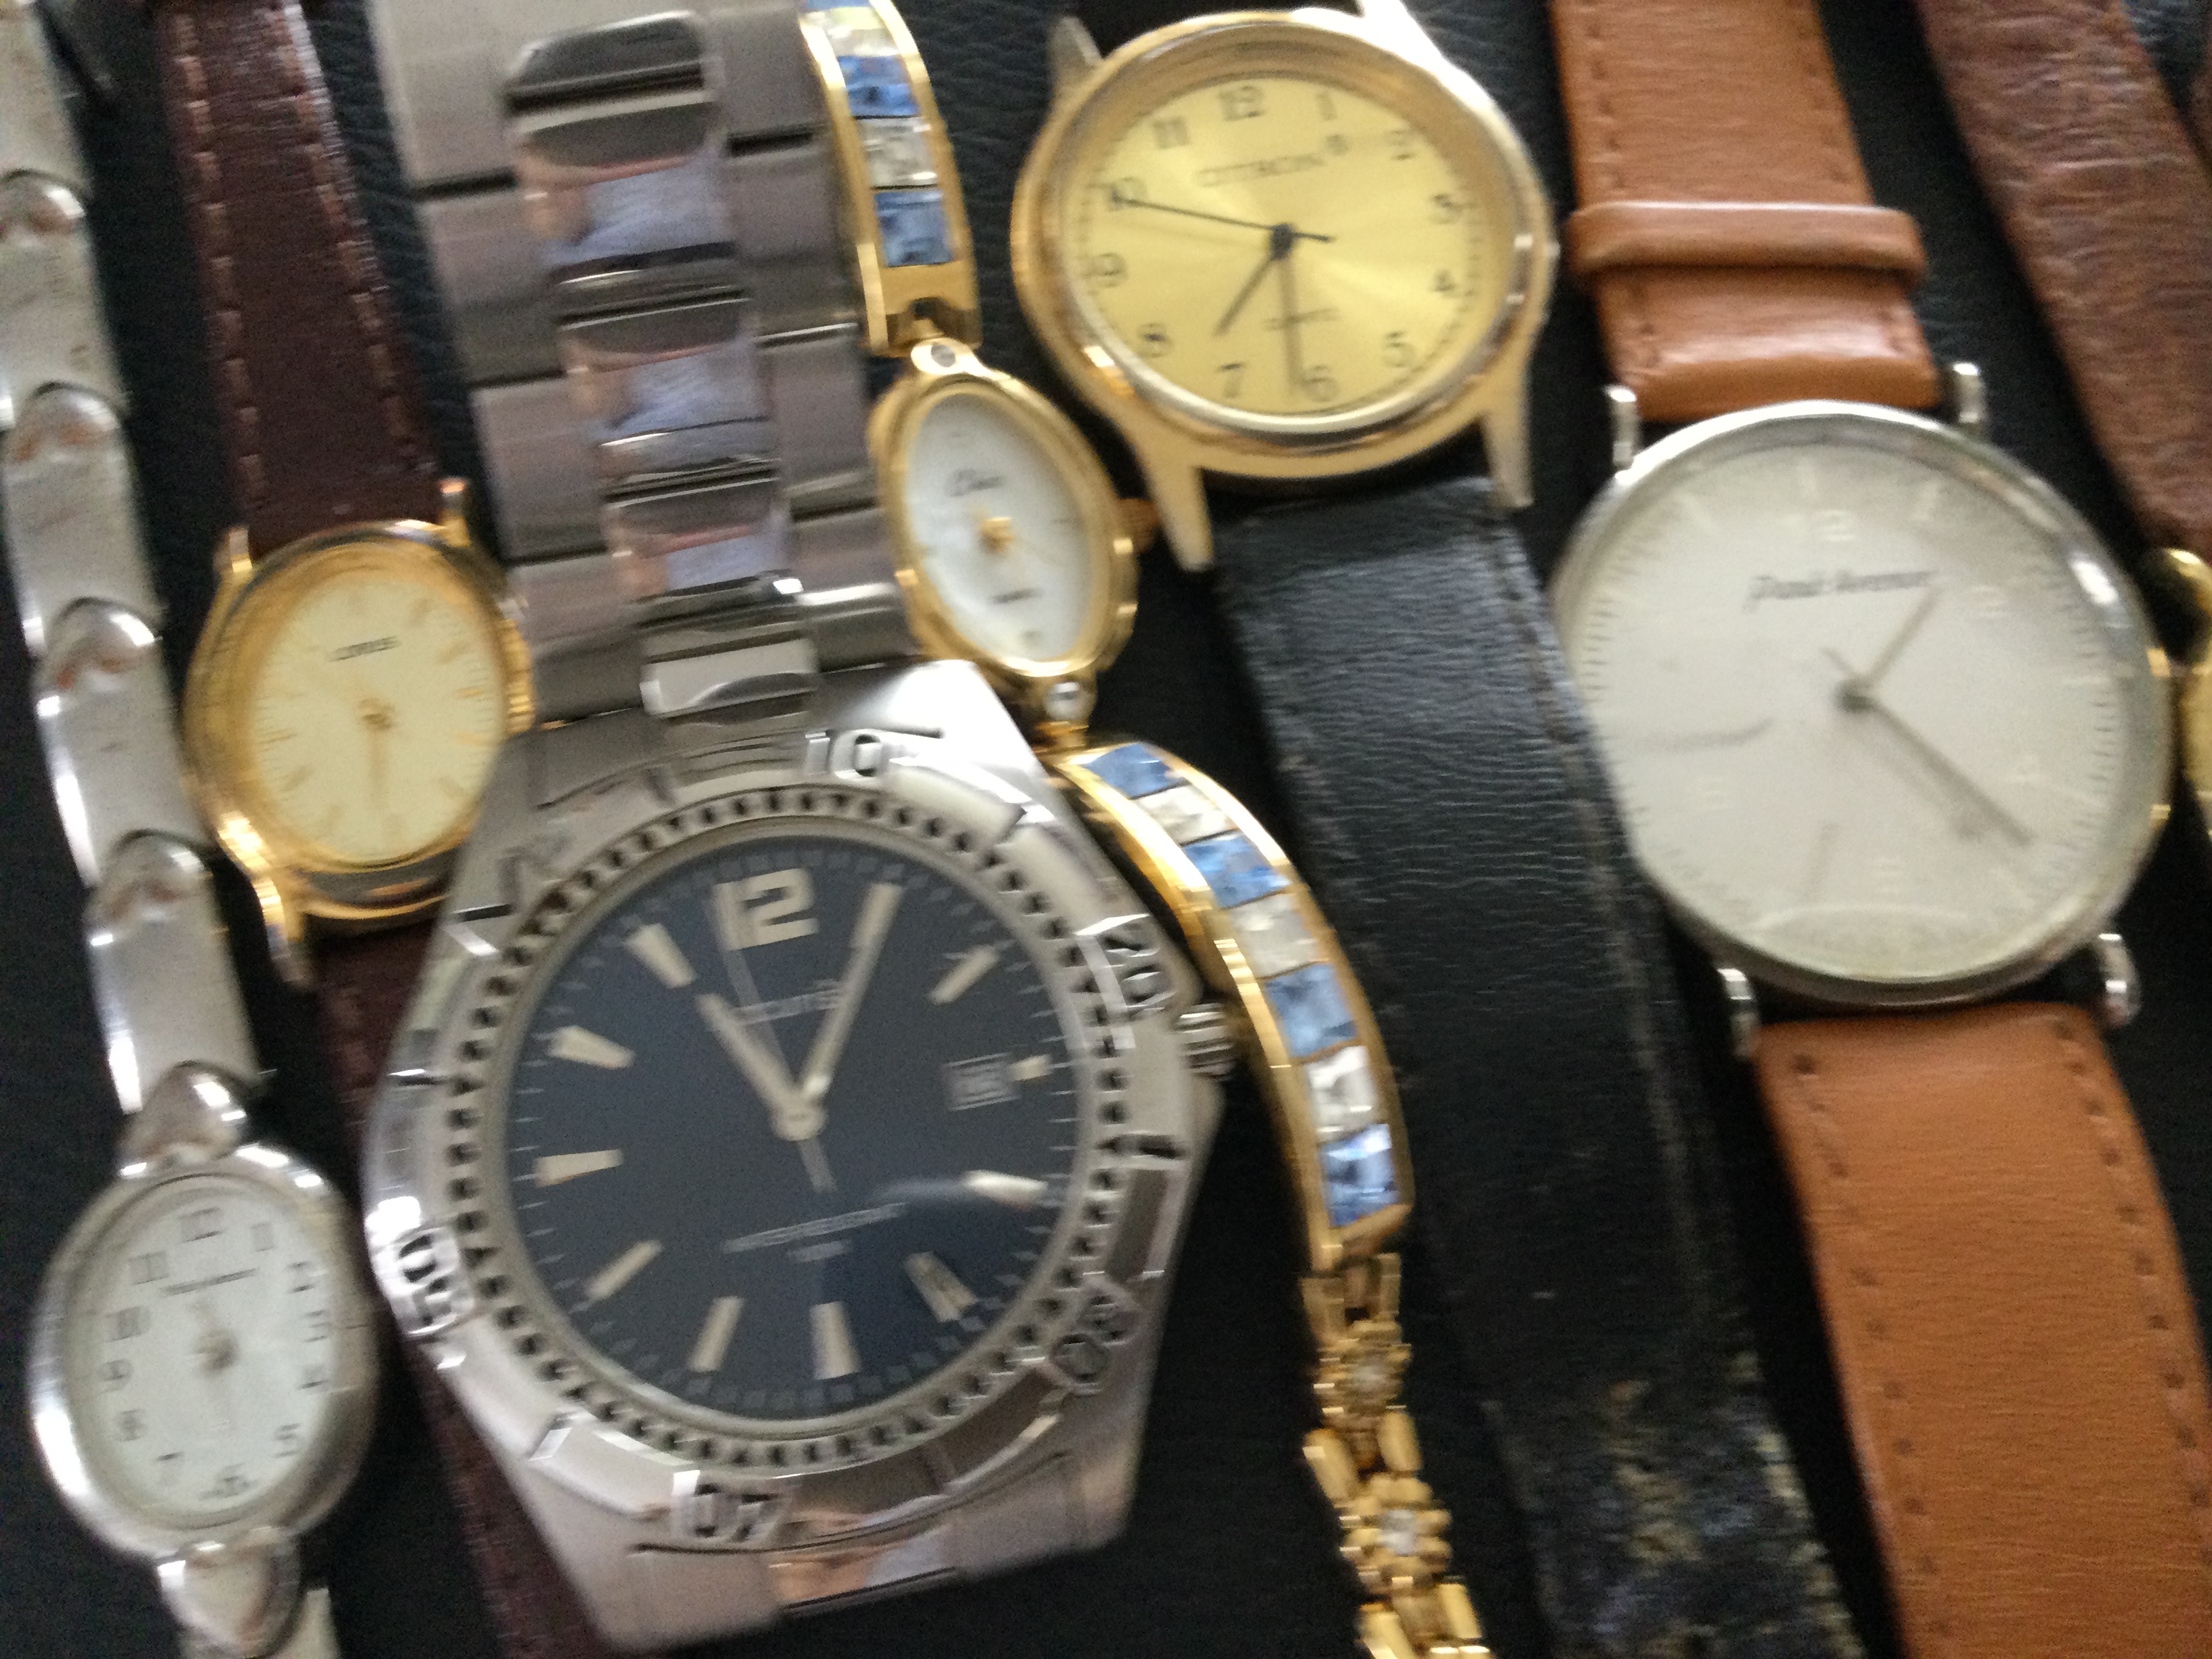 15 Ladies & Gents Watches, Gold Plated Lorus, Gold Plated Chic, Philip Mercer Etc (GS 69) Here - Image 5 of 6